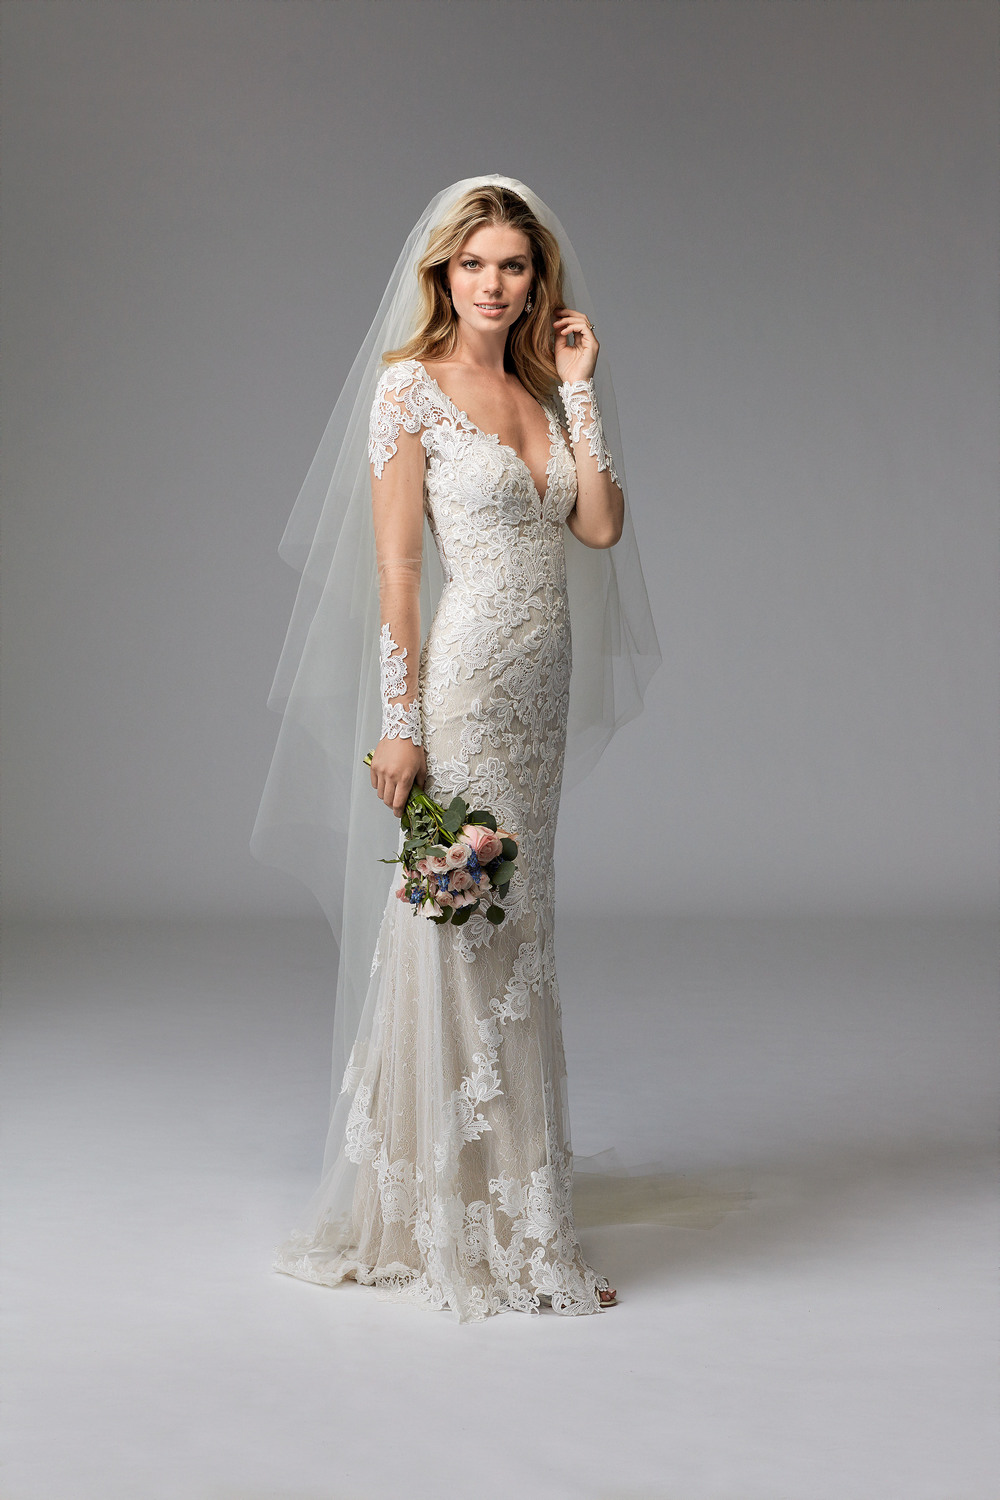 Wtoo's Claude has an illusion back and sleeves, which gives an elegant balance to her bold neckline!